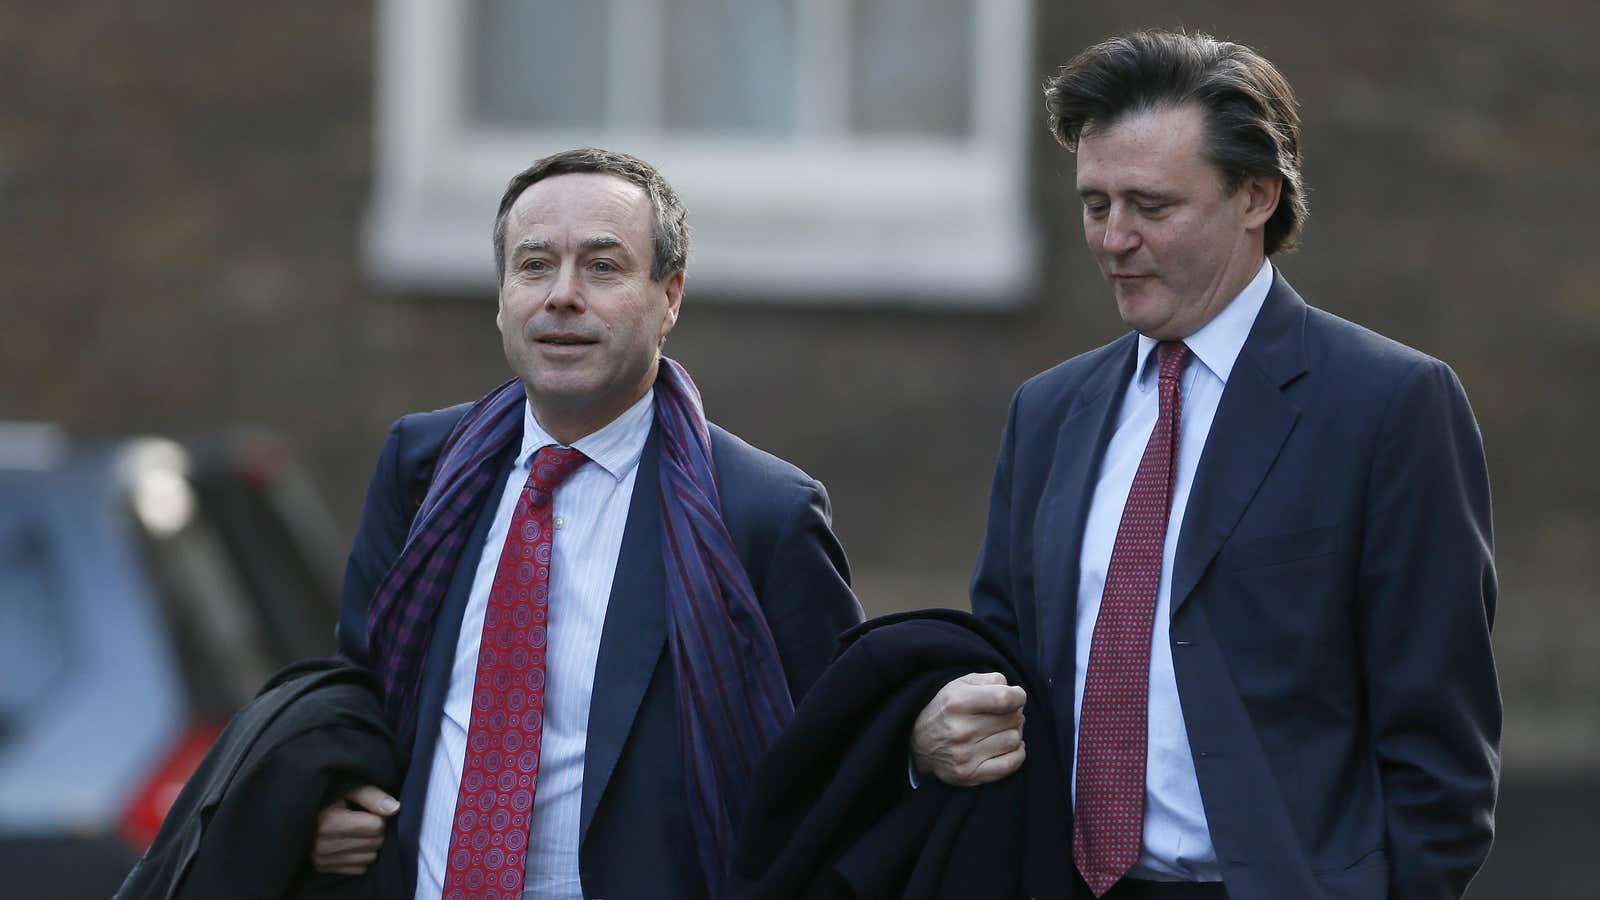 Lionel Barber, left, arrives in Downing Street in London, with John Micklethwaite, now editor-in-chief of Bloomberg News